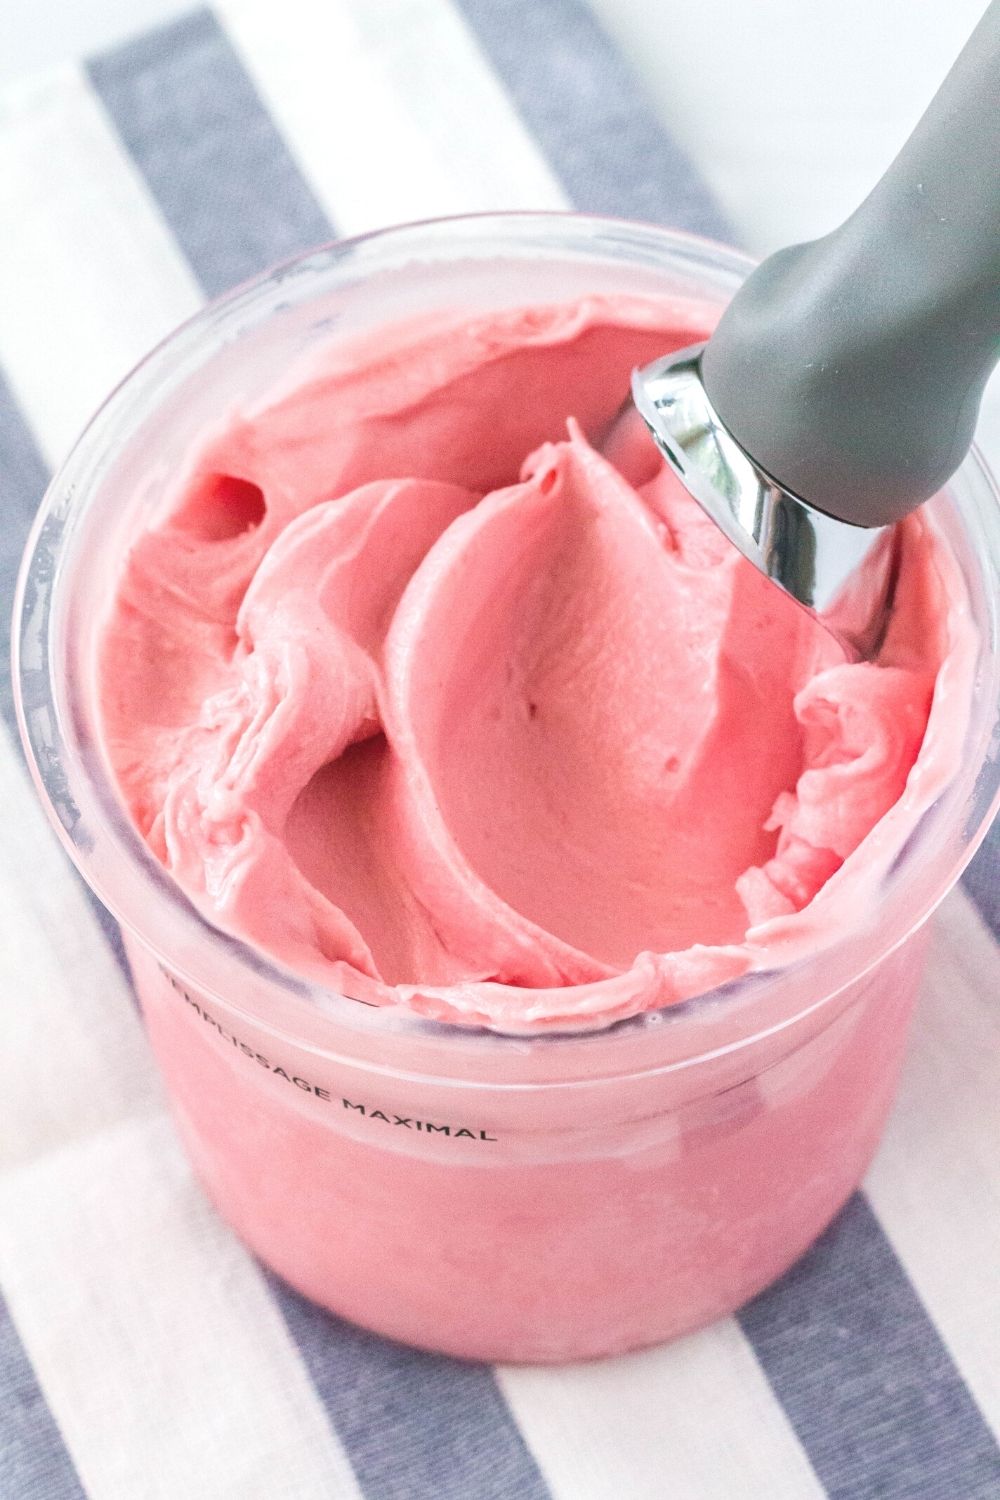 a Ninja Creami pint container filled with pink cherry cheesecake ice cream. An ice cream scoop is in the pint.